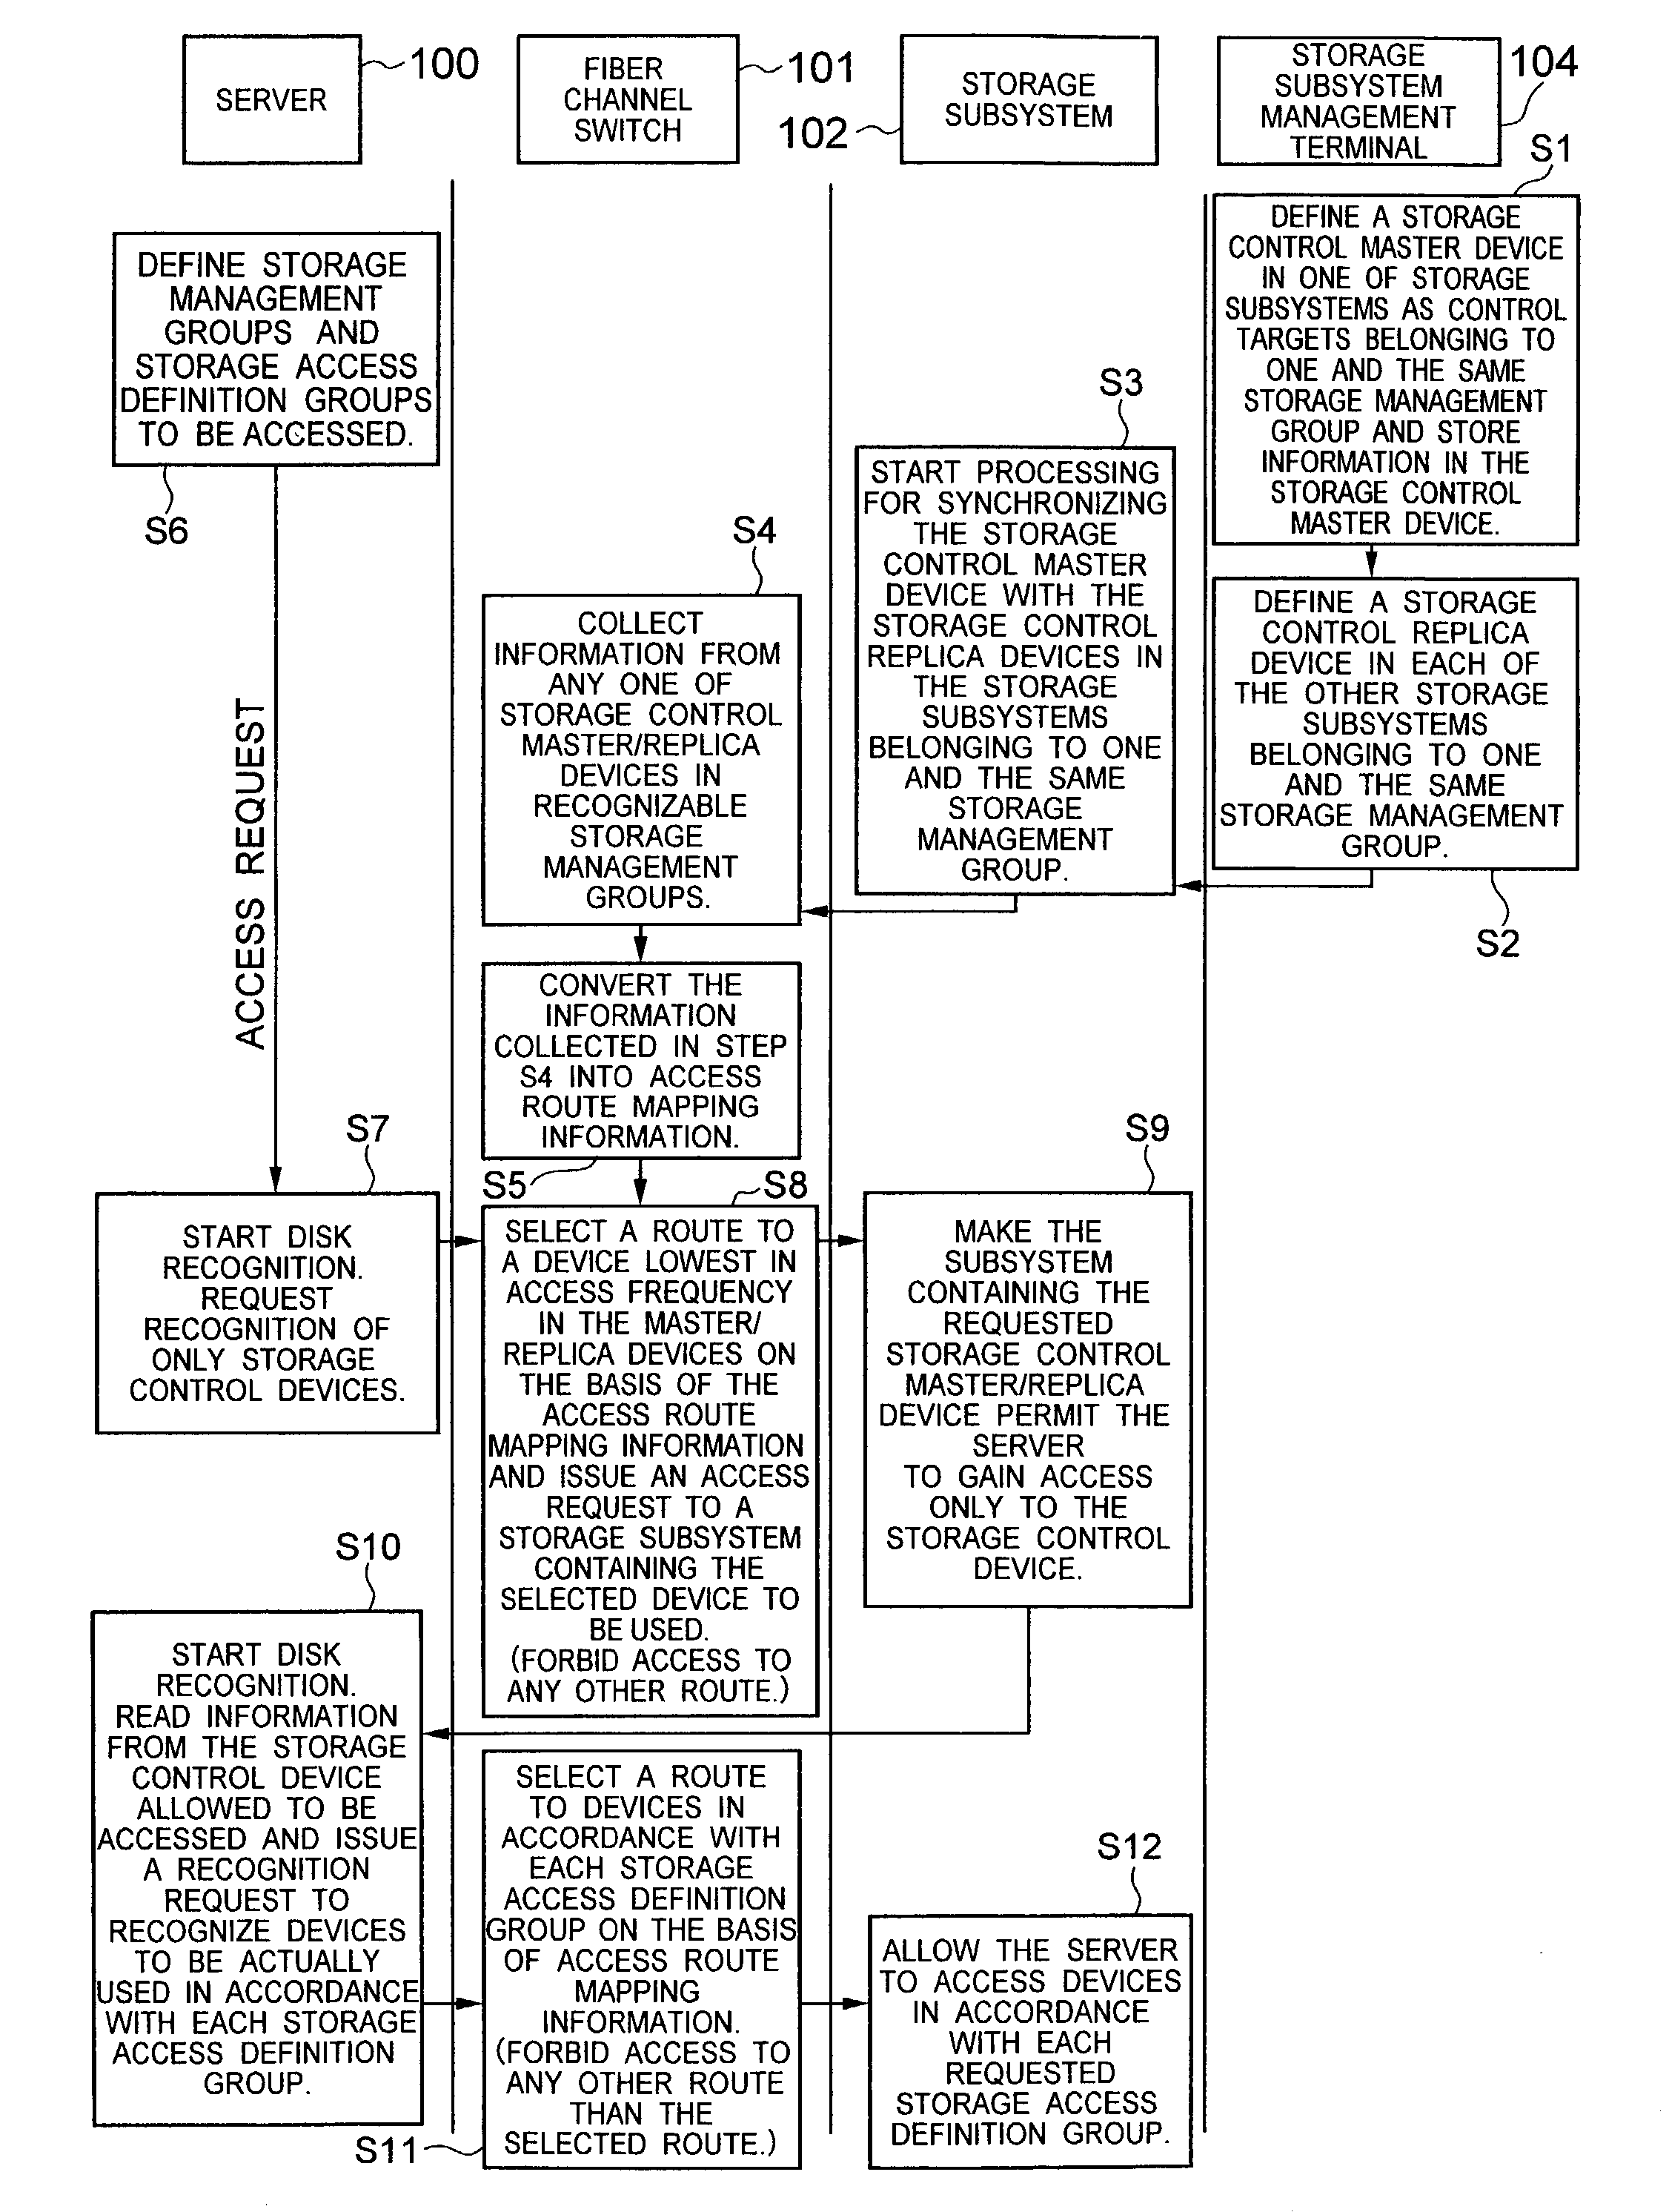 Disk device and disk access route mapping